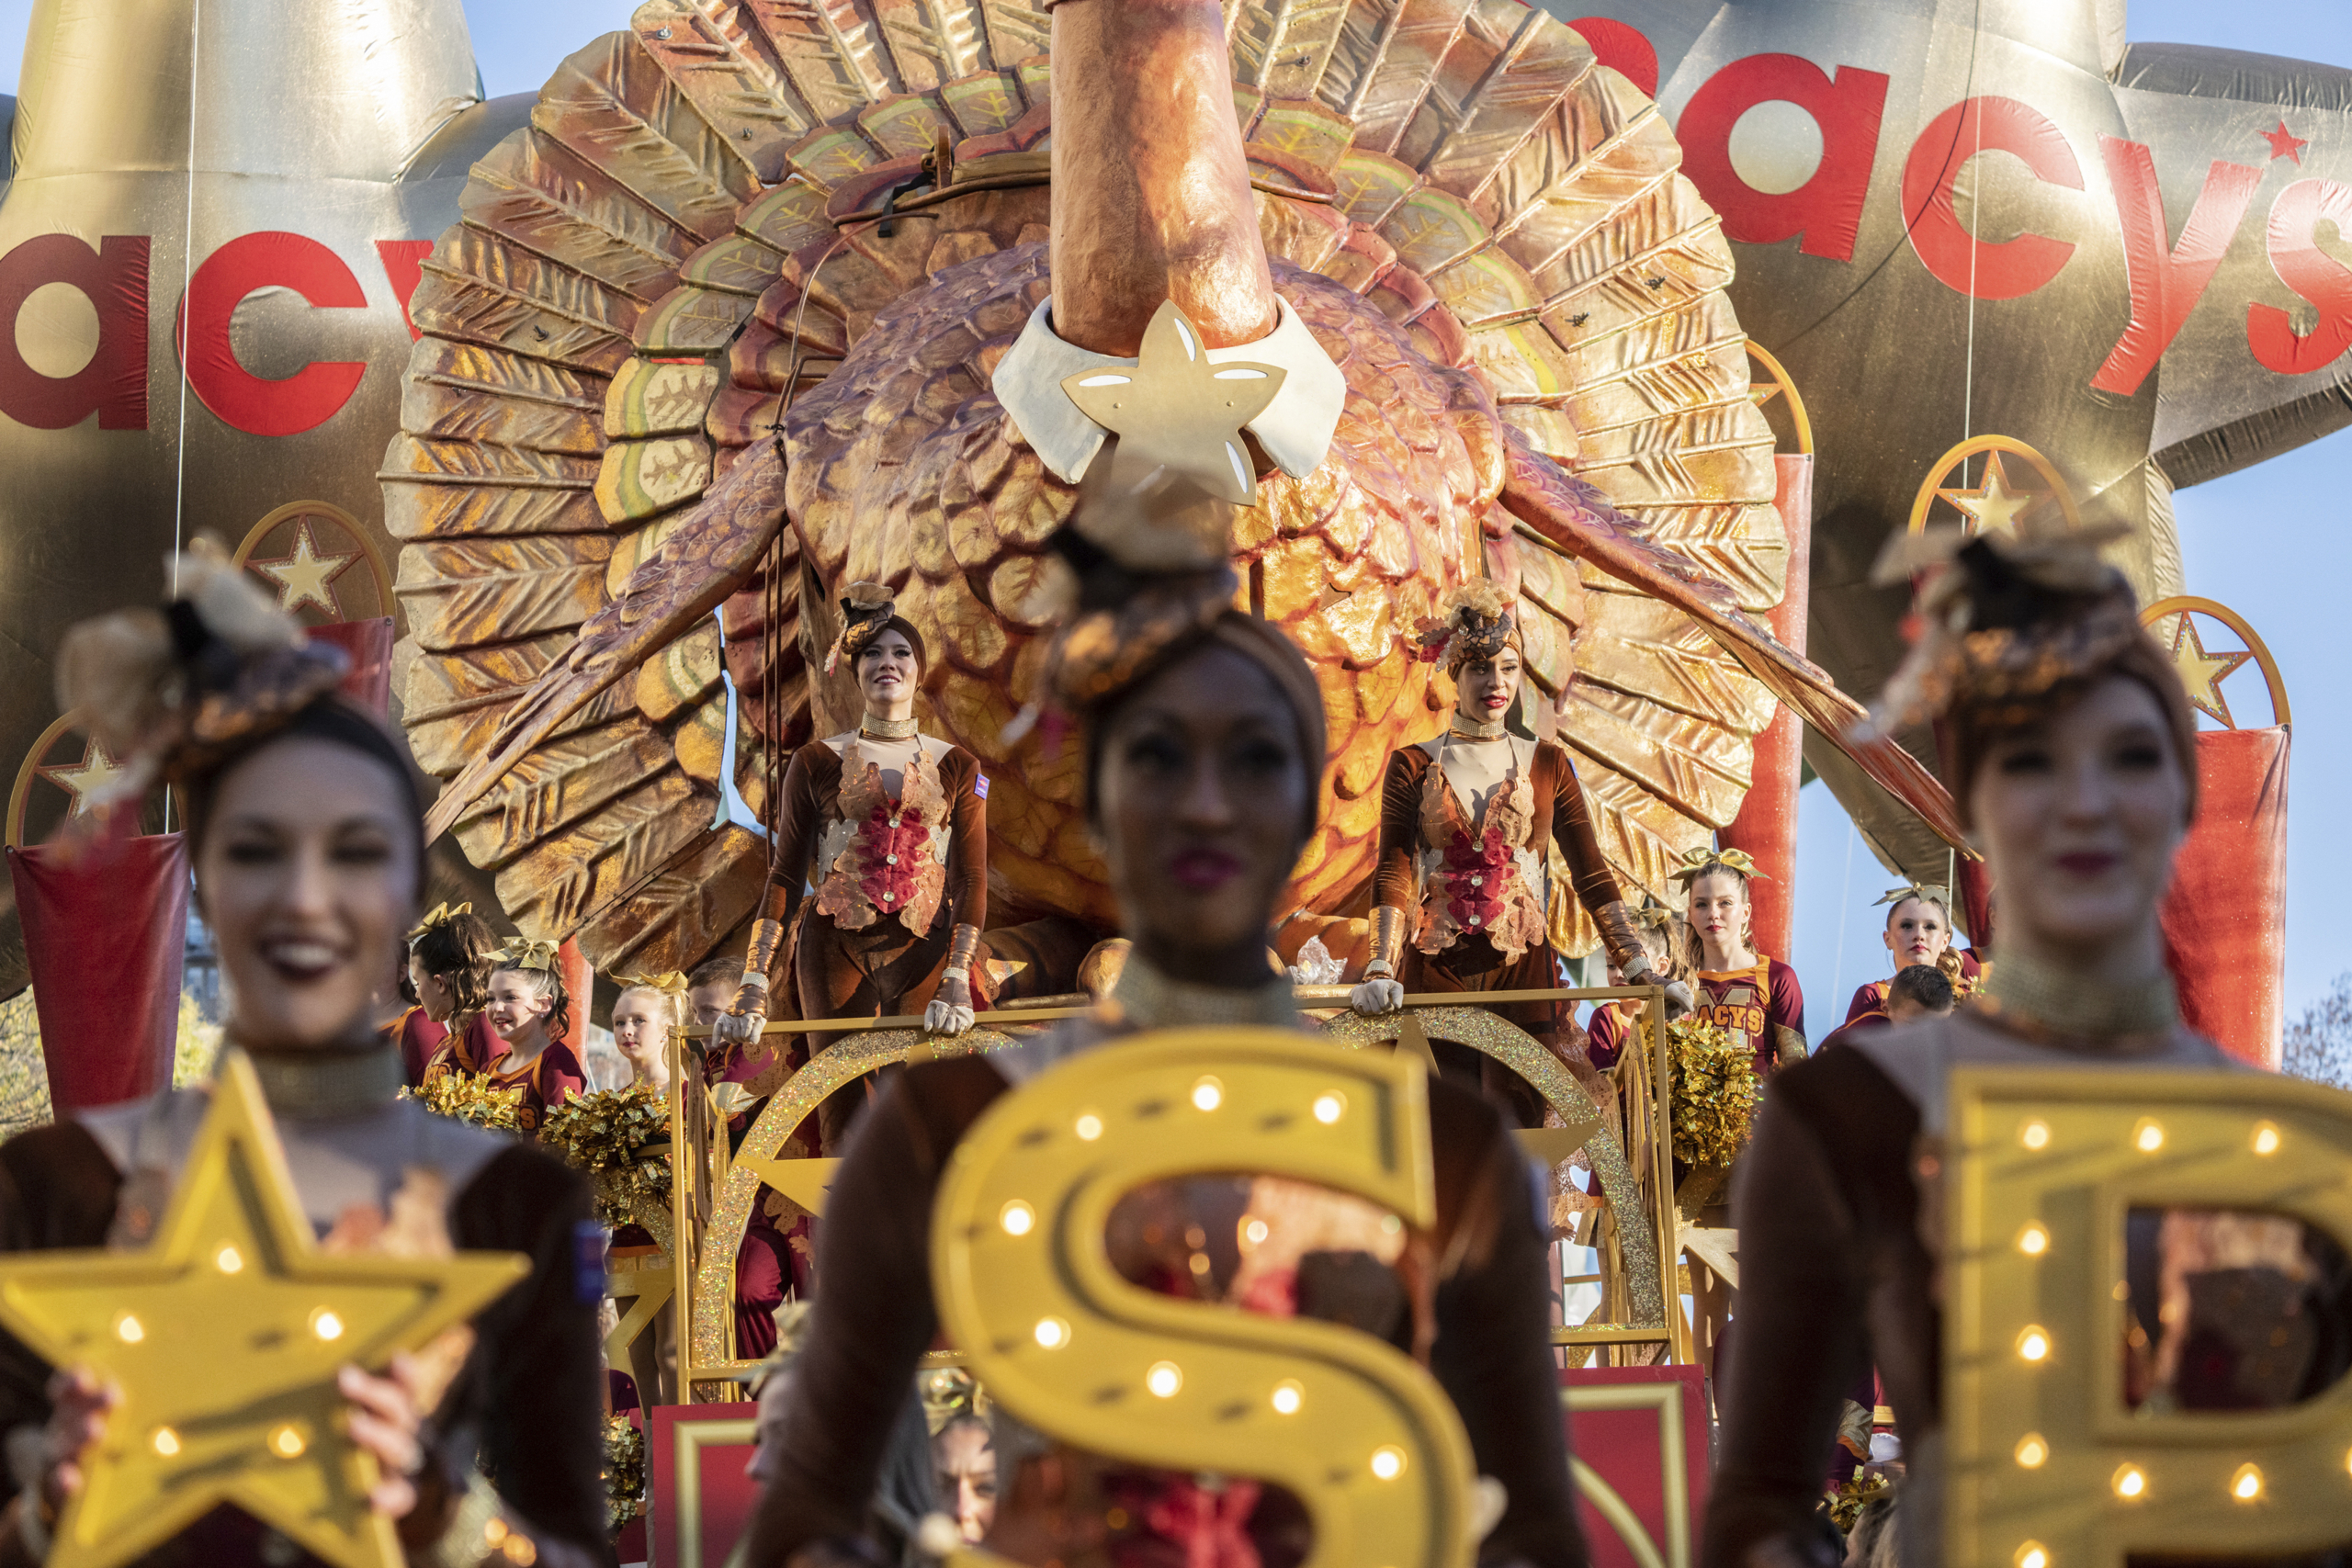 Parade performers lead the Tom Turkey float down Central Park West at the start of the Macy's Thanksgiving Day parade, Thursday, Nov. 23, 2023, in New York. (AP Photo/Jeenah Moon)